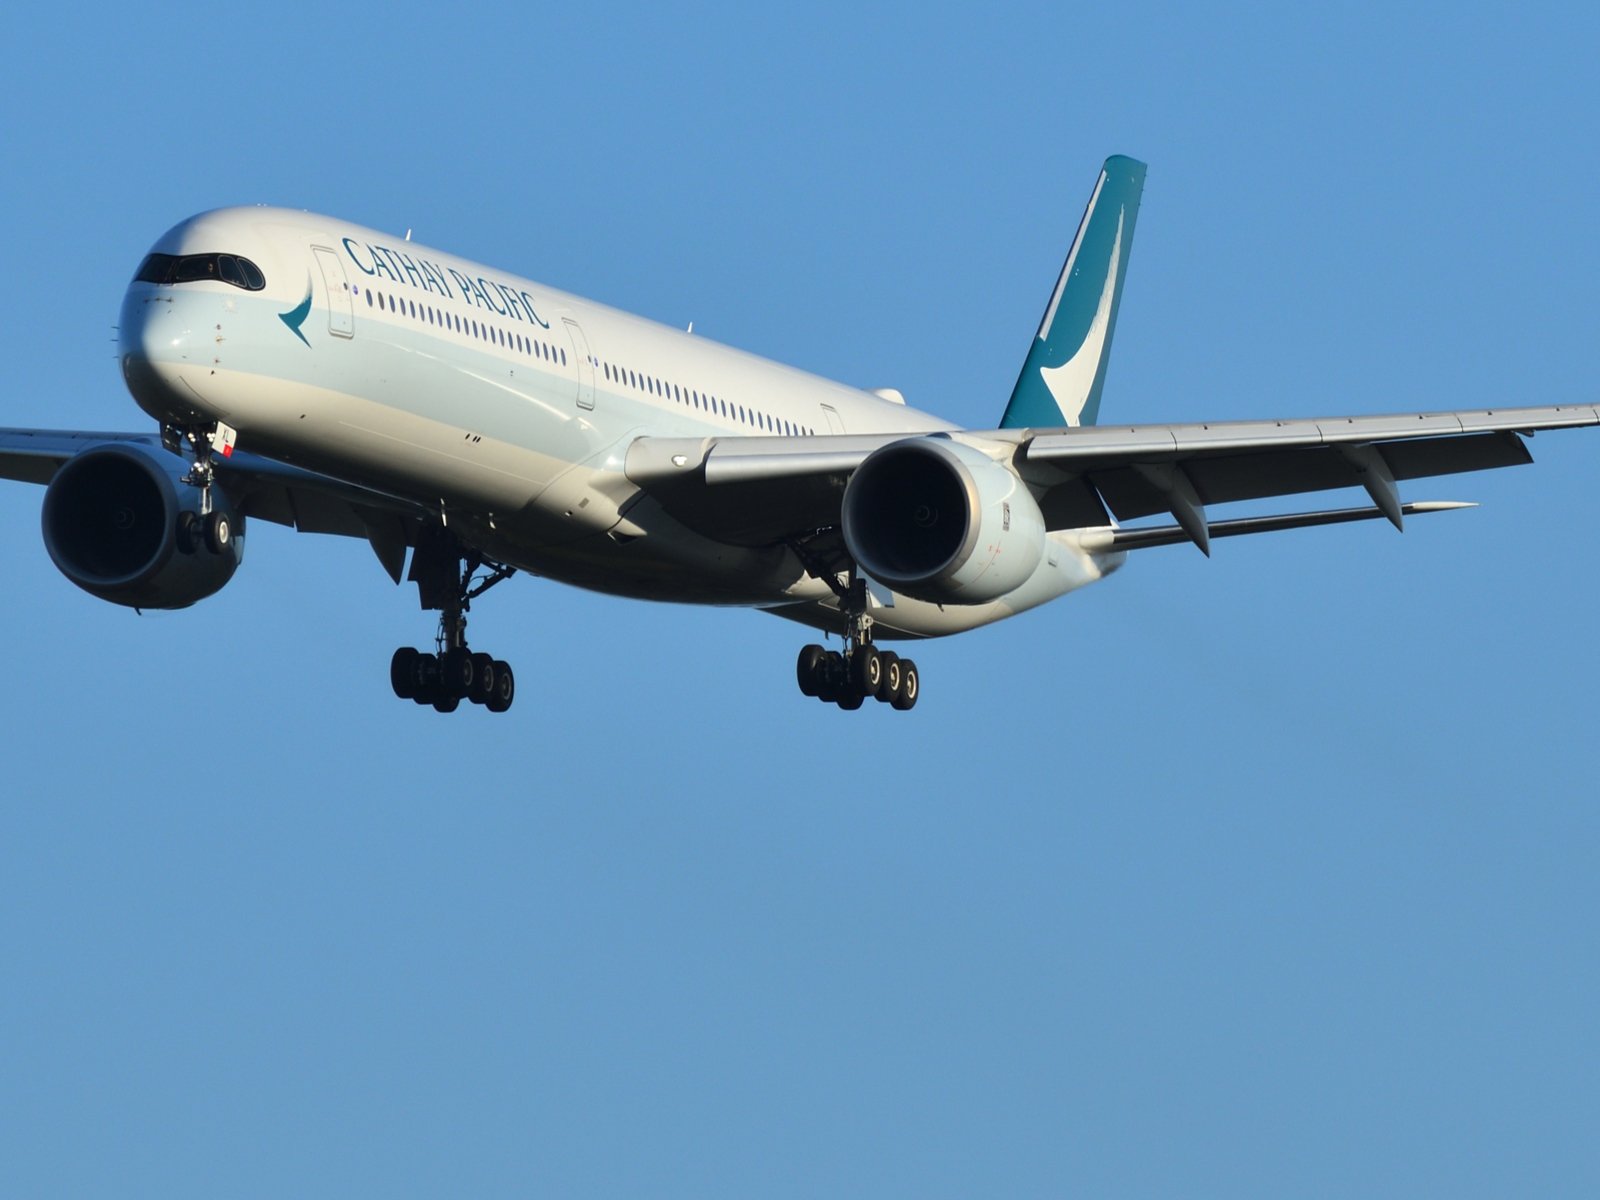 A Cathay Pacific flight prepares to land.